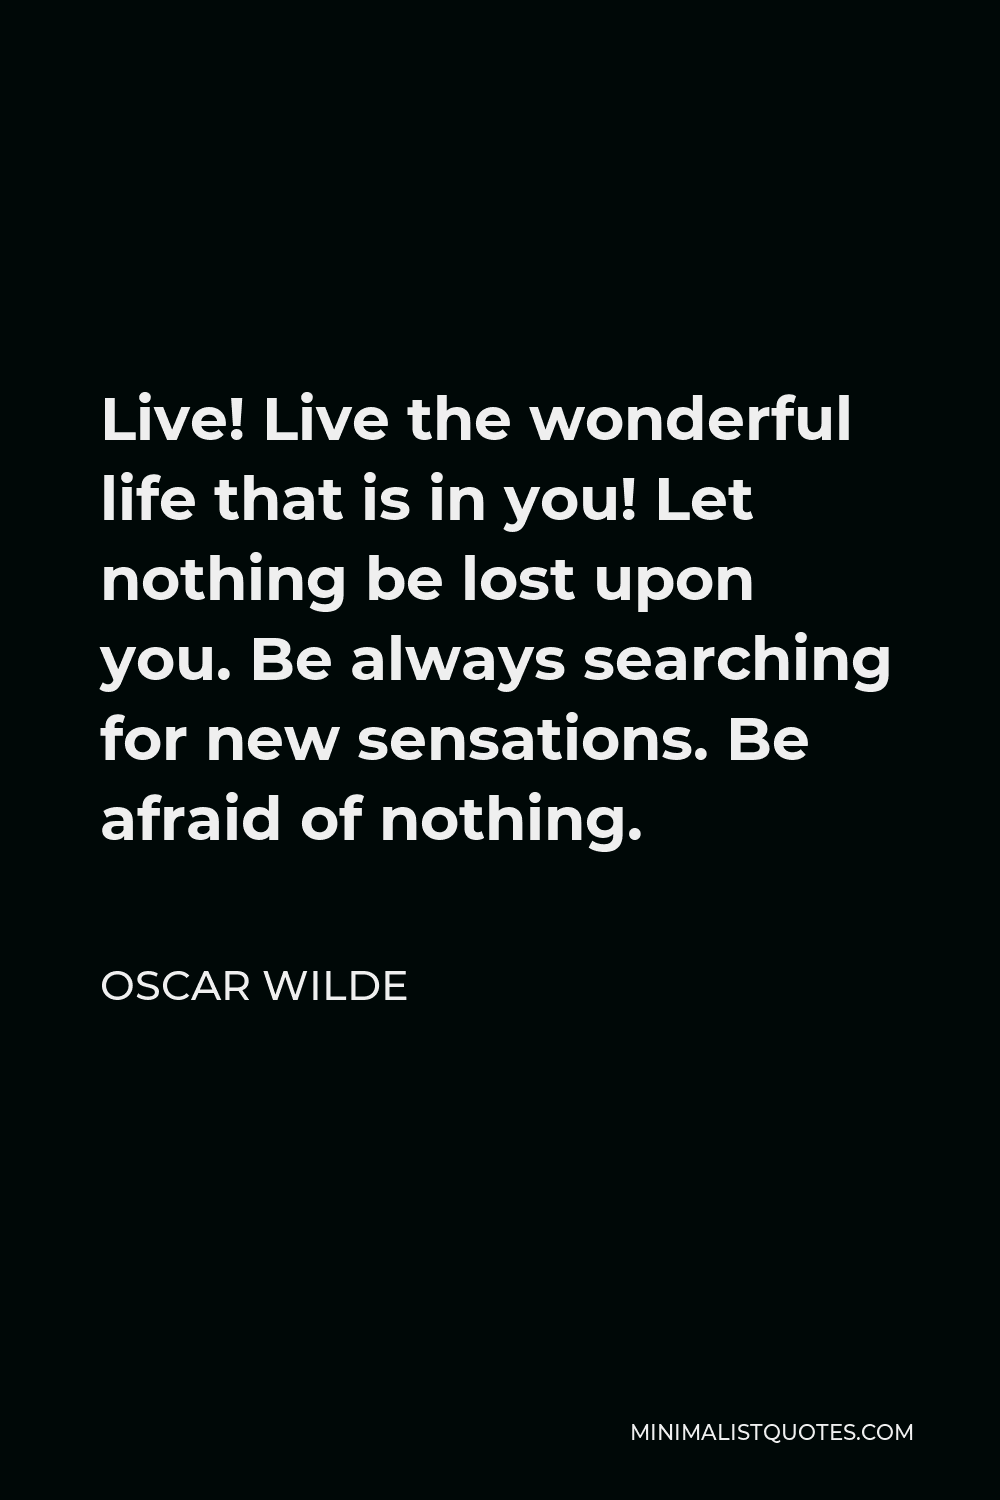 Oscar Wilde Quote - Live! Live the wonderful life that is in you! Let nothing be lost upon you. Be always searching for new sensations. Be afraid of nothing.